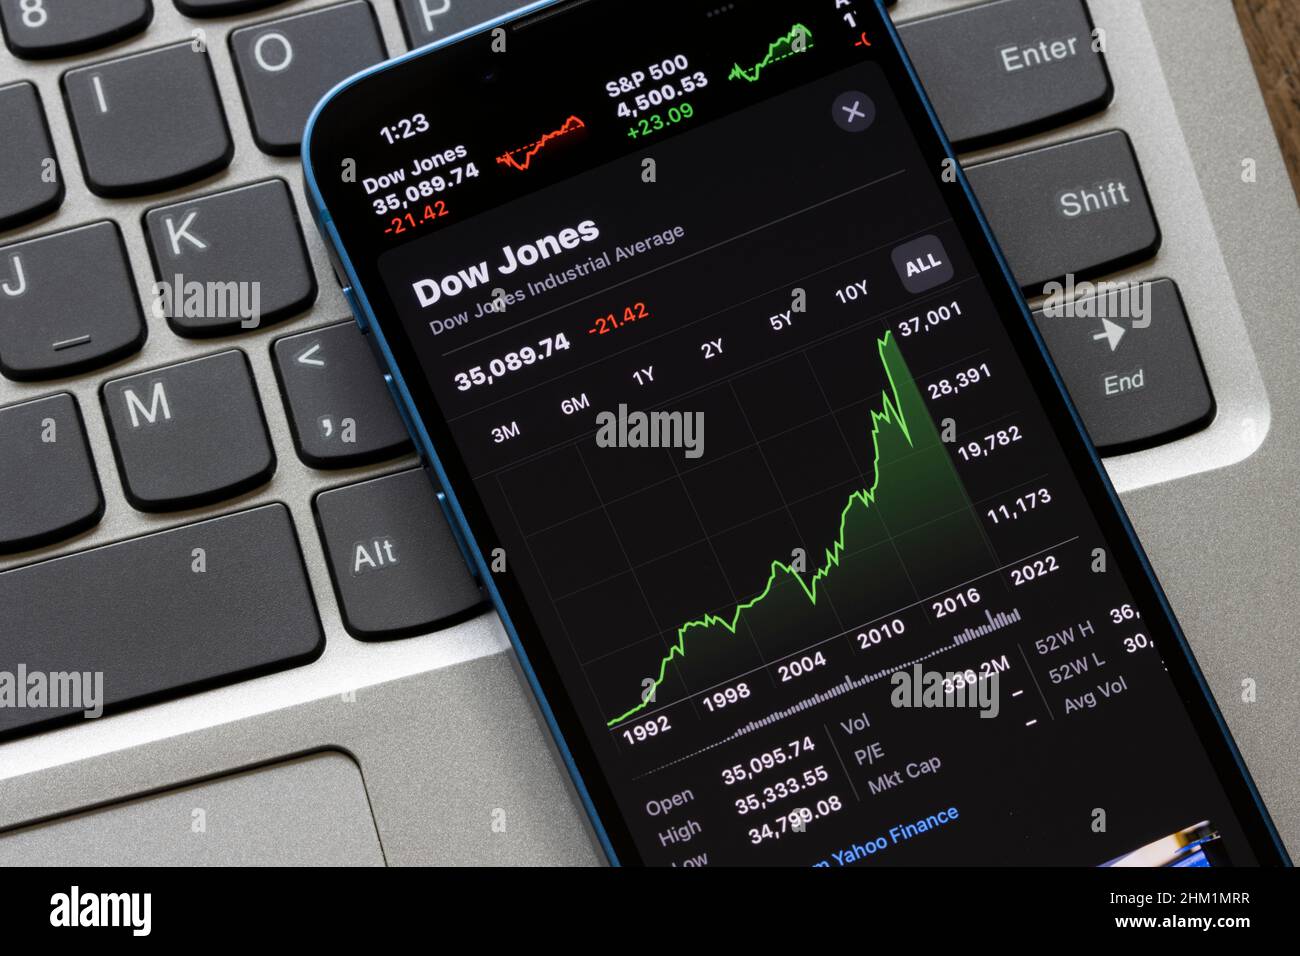 Dow Jones Industrial Average all-time index is seen on an iPhone after it closes at 35,089.74 points on Friday, February 4, 2022. The Dow reached... Stock Photo